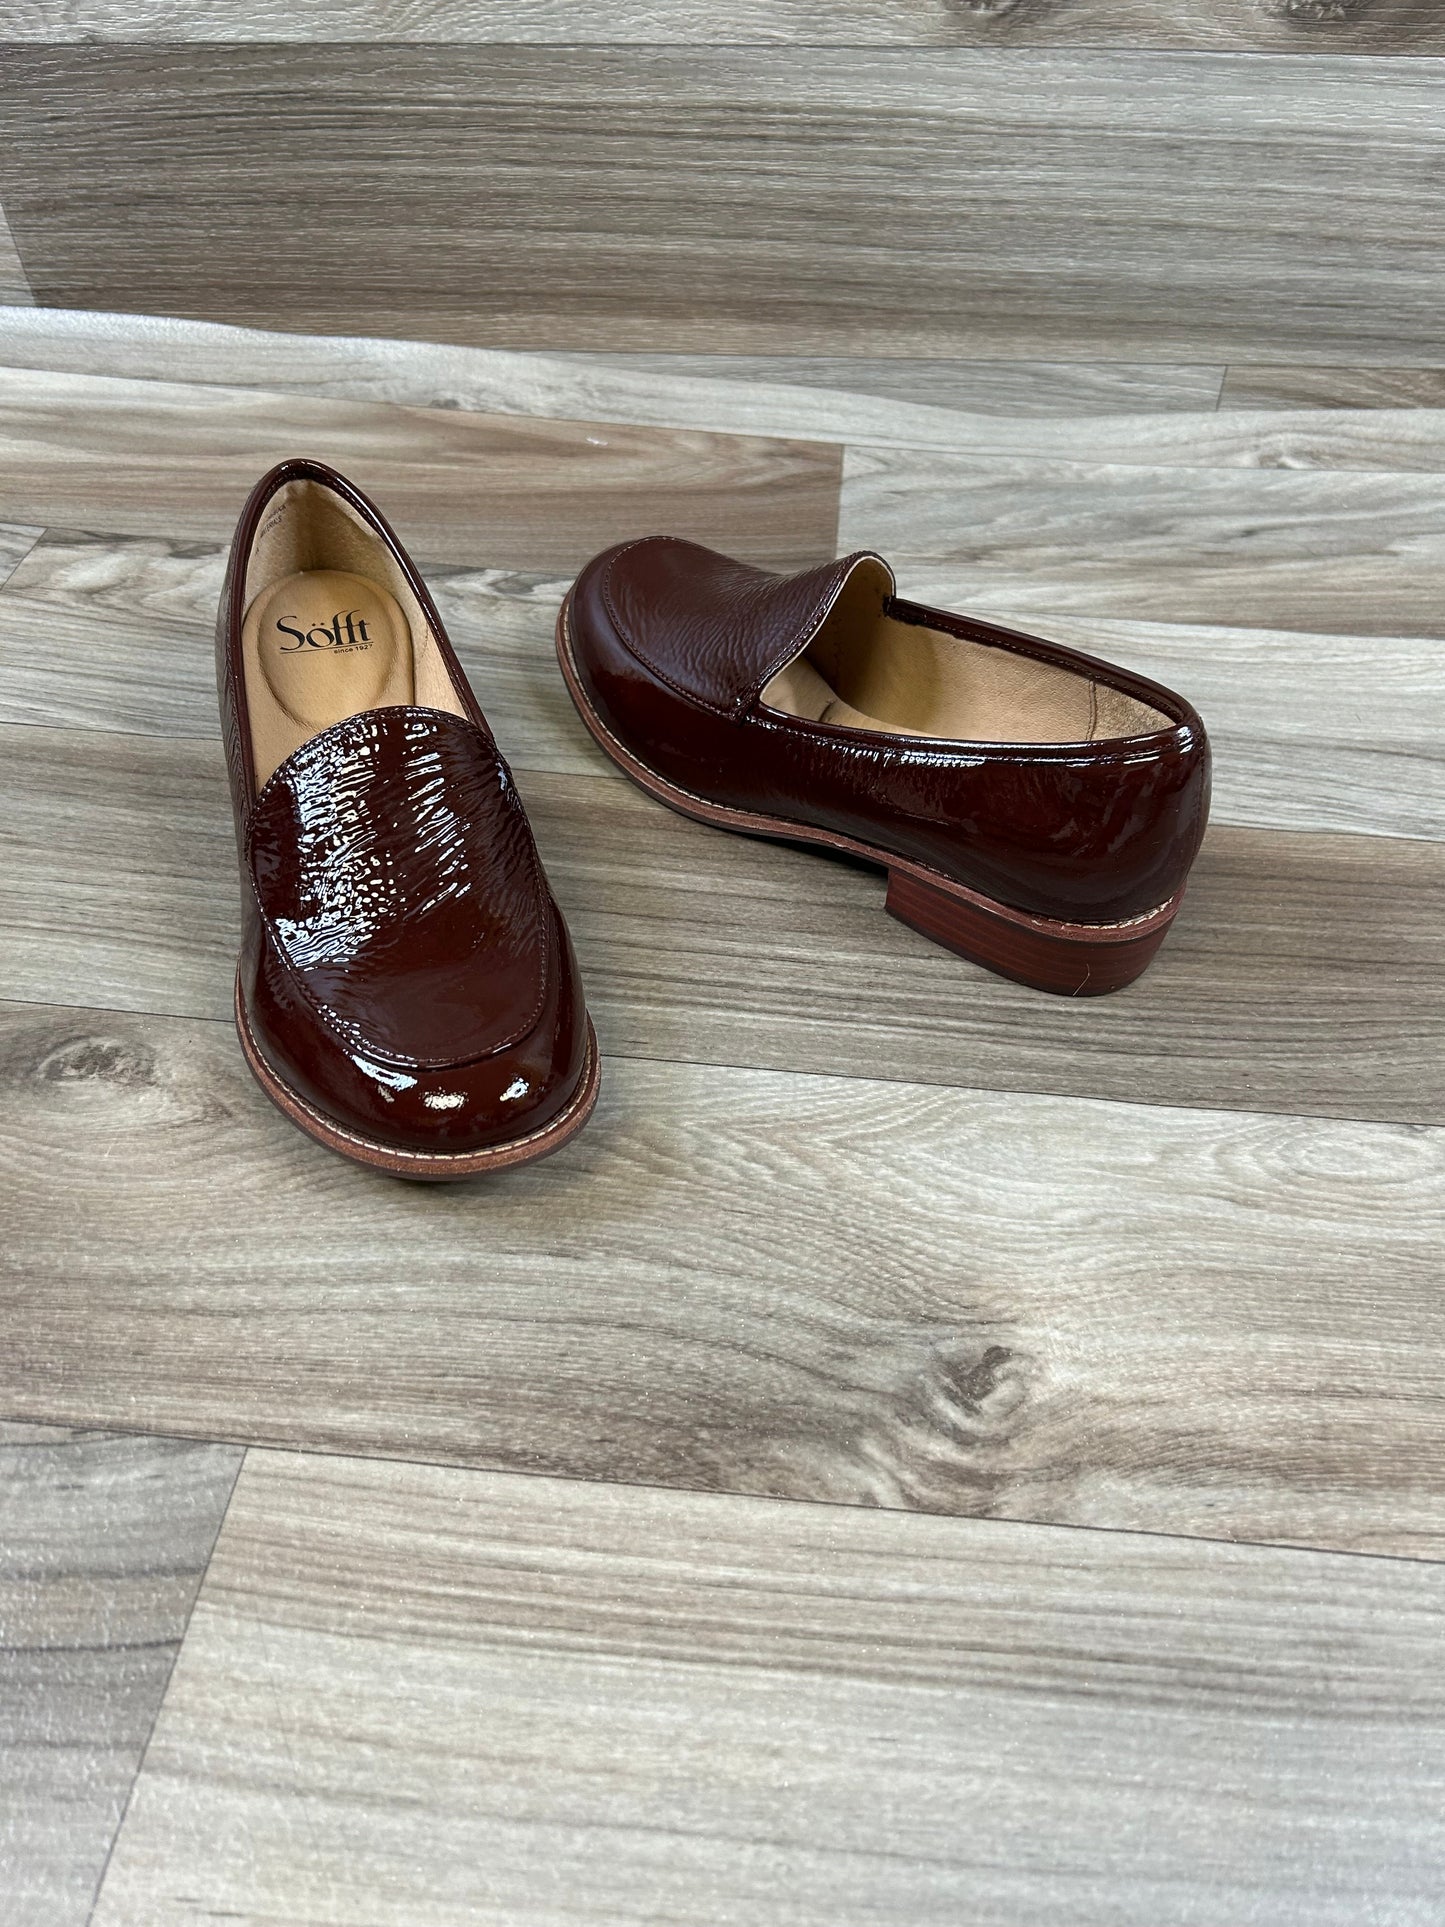 Shoes Heels Loafer Oxford By Sofft  Size: 7.5